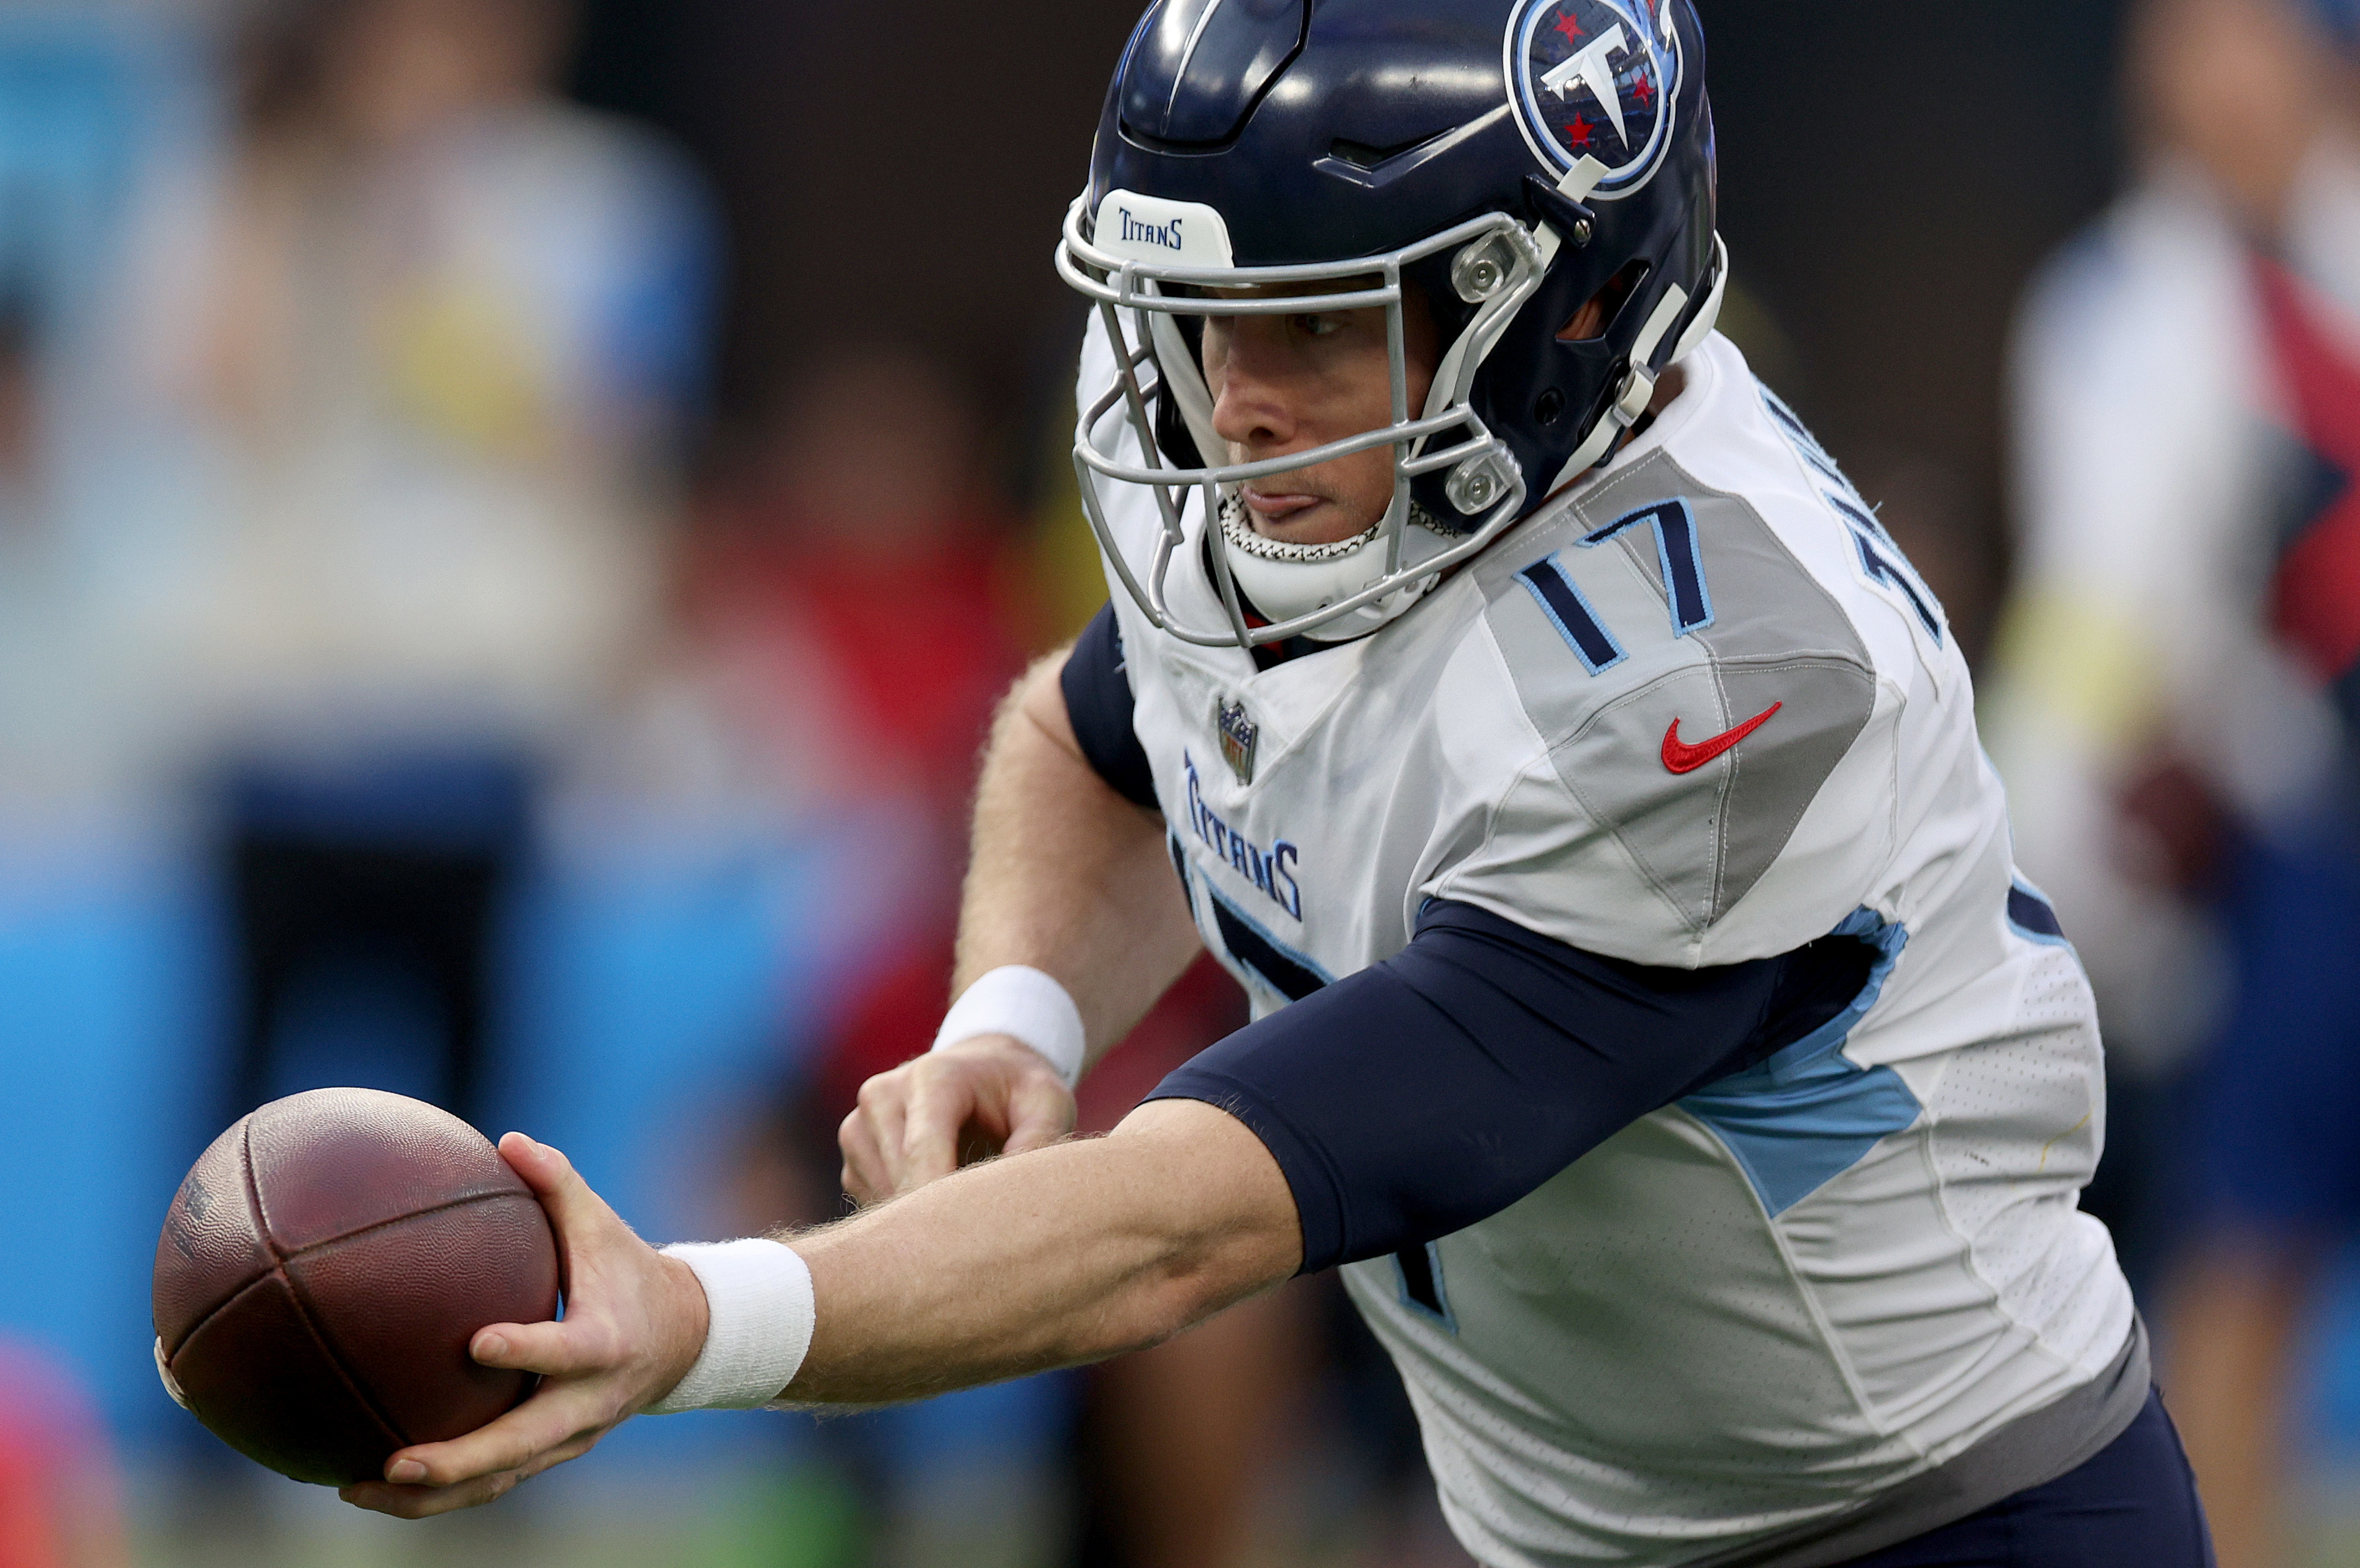 Matt Cassel to Titans: Latest Contract Details, Comments and